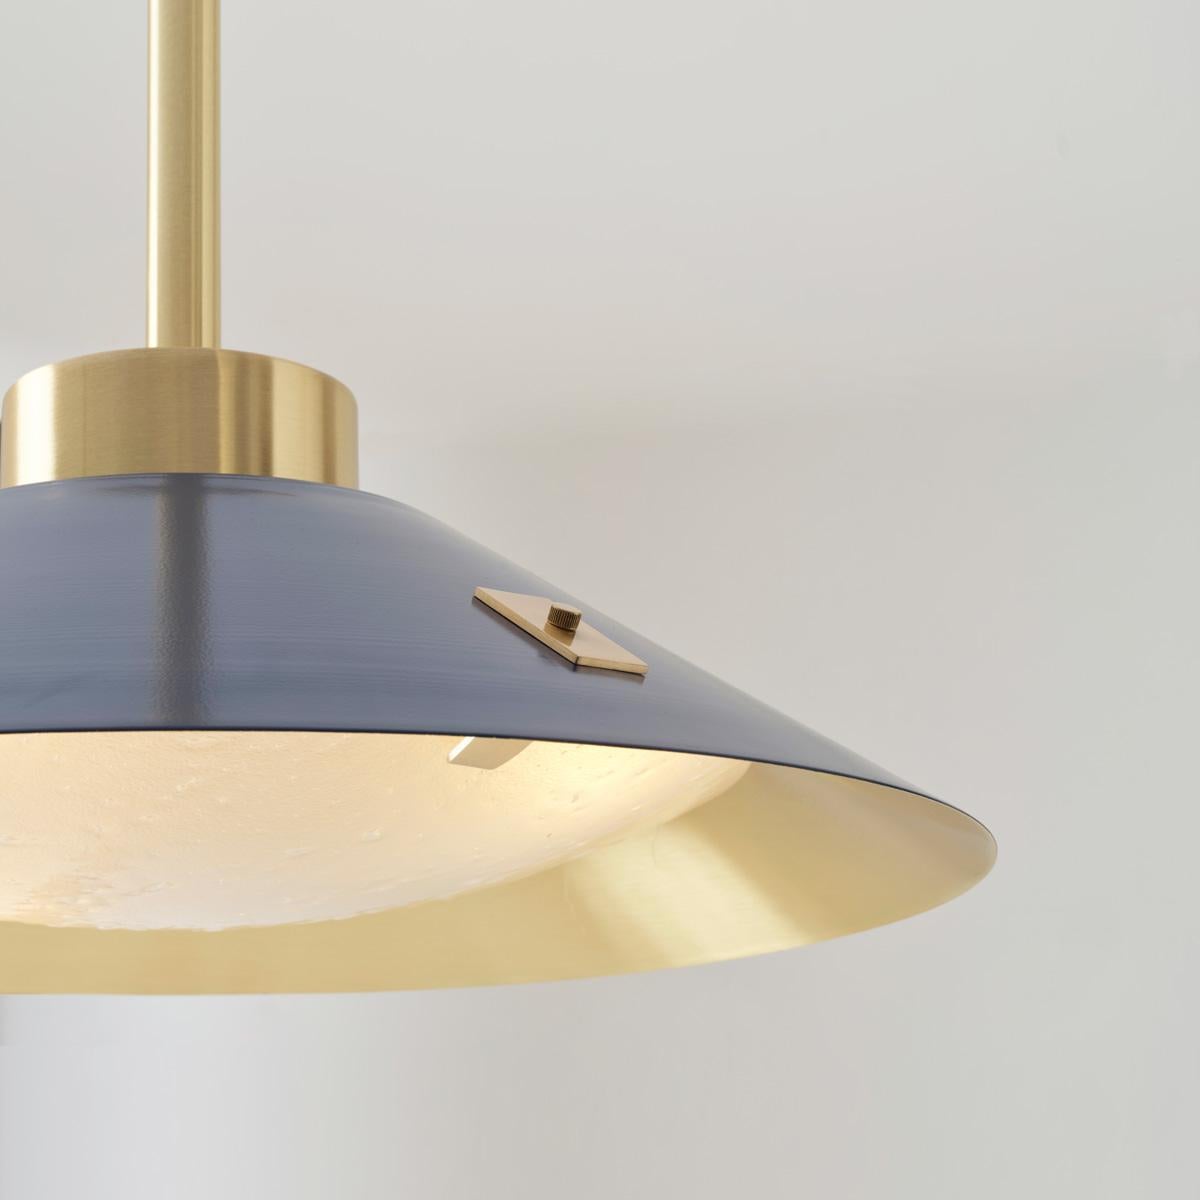 Kono Pendant by Gaspare Asaro. Satin Brass and Mediterranean Blue In New Condition For Sale In New York, NY